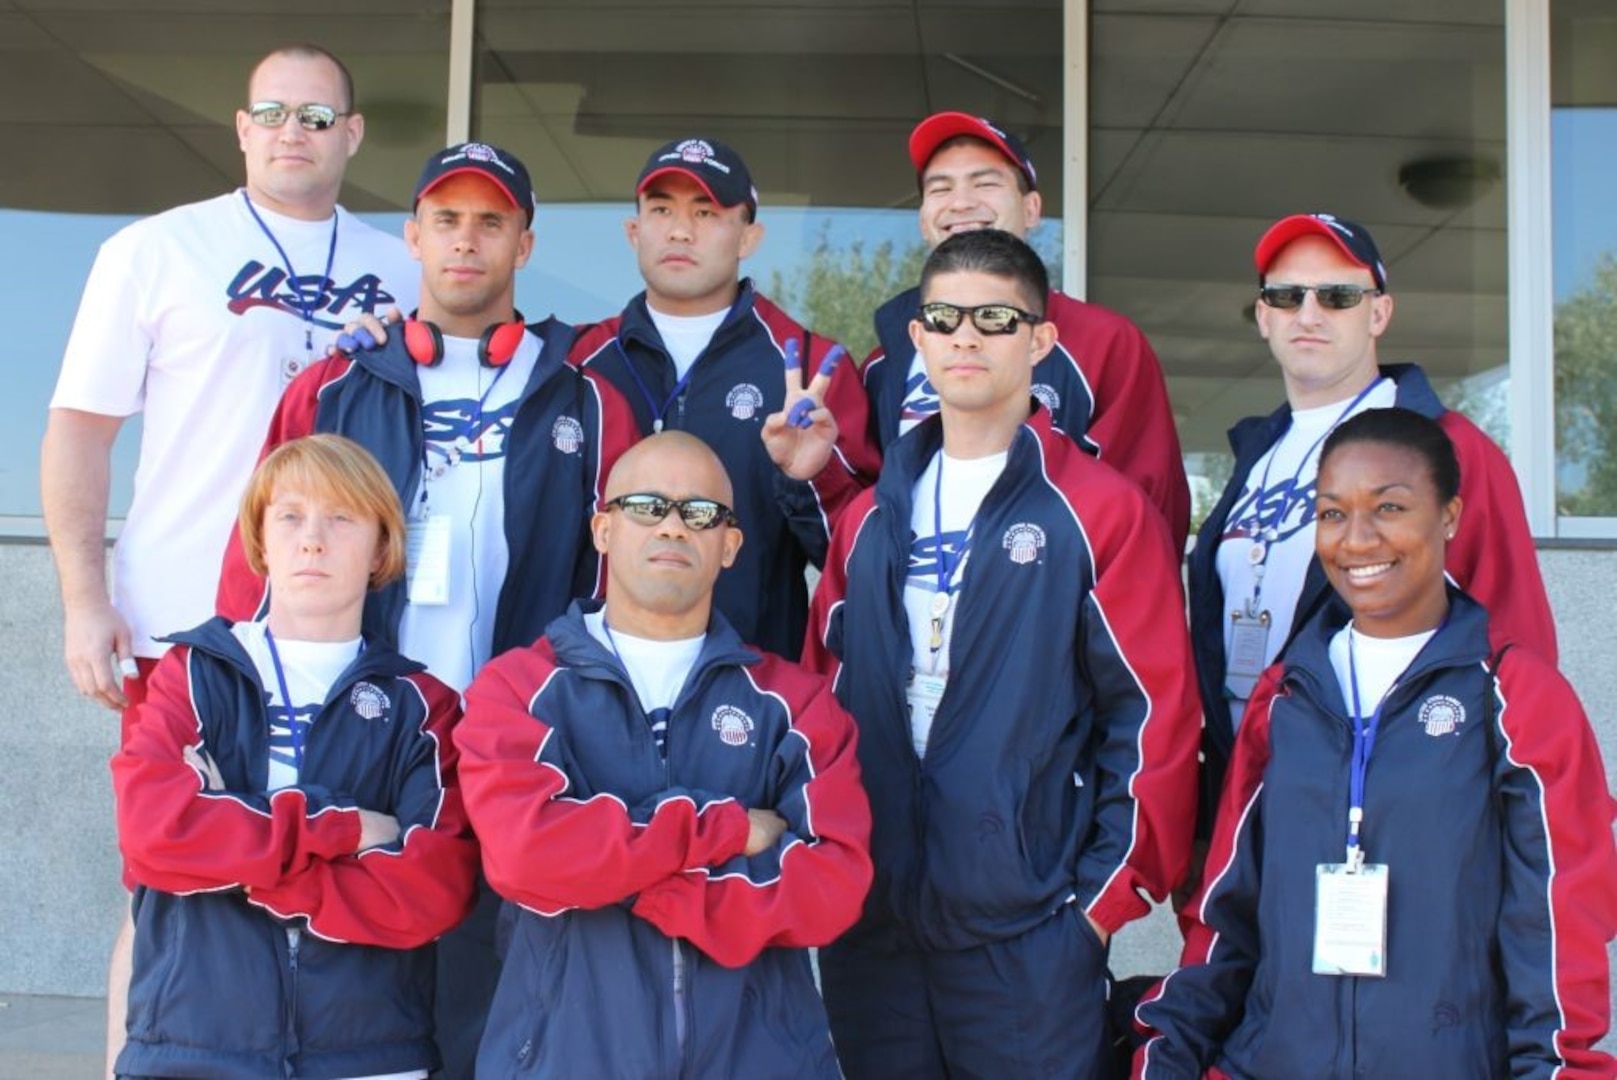 Team USA arrives in Kazakhstan for the start of the CISM World Military Judo Championship 30 June to 7 July in Astana.  